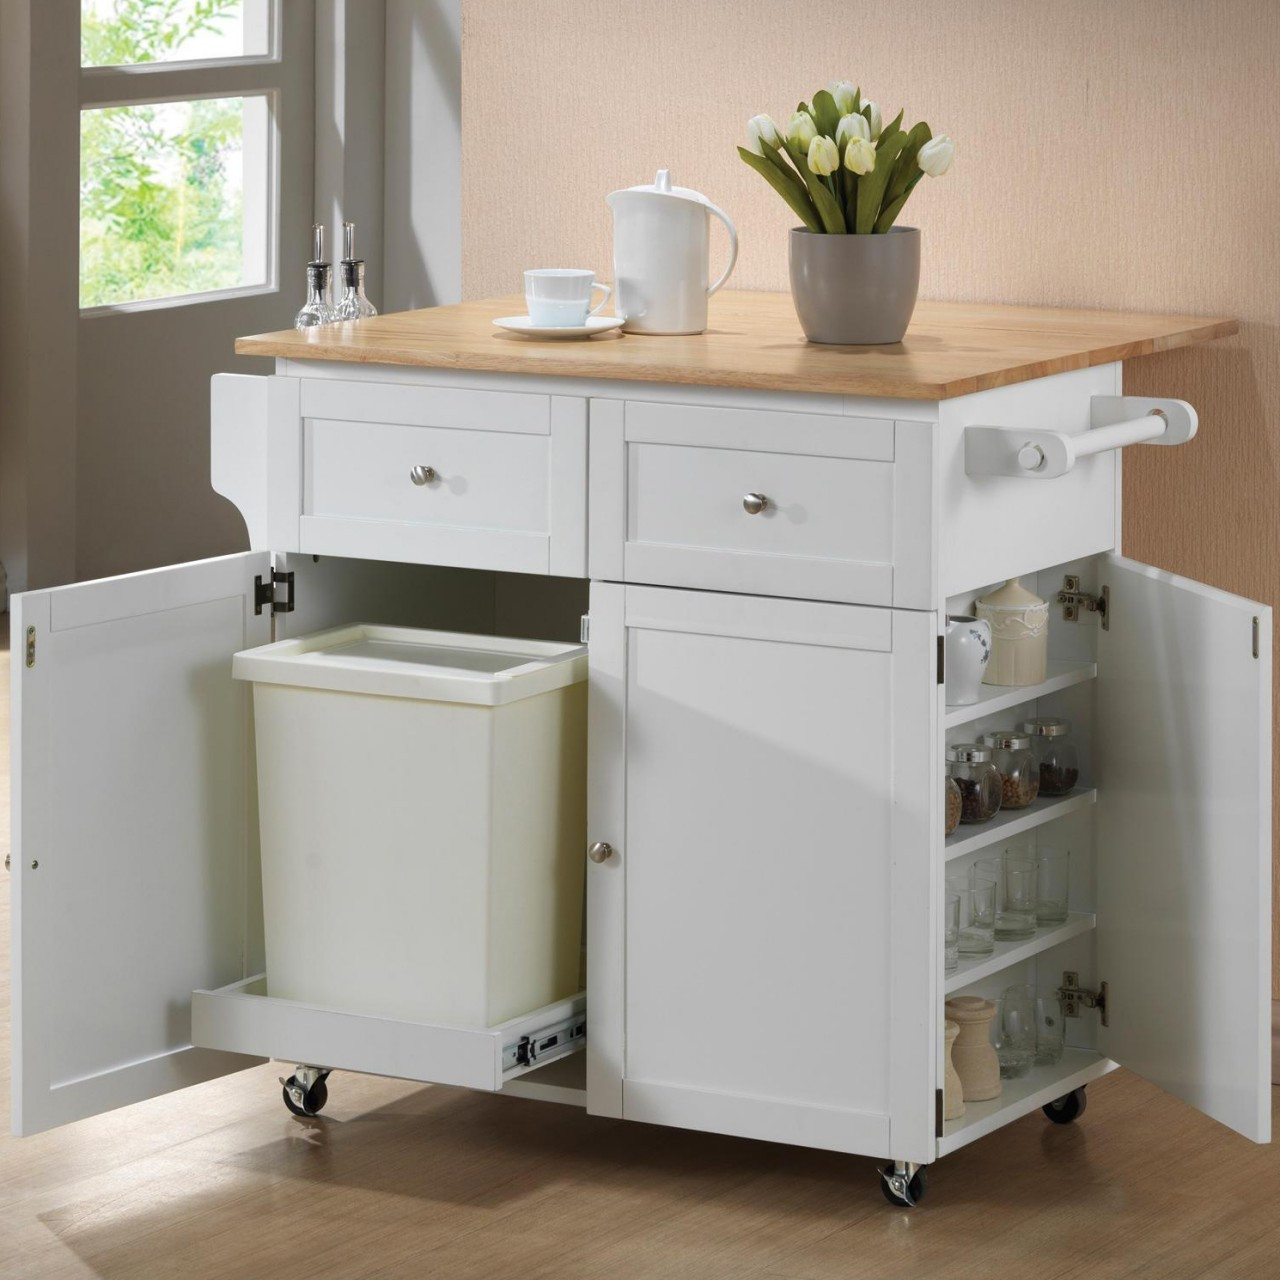 Portable Kitchen Island With Storage
 15 Amazing Movable Kitchen Island Designs and Ideas